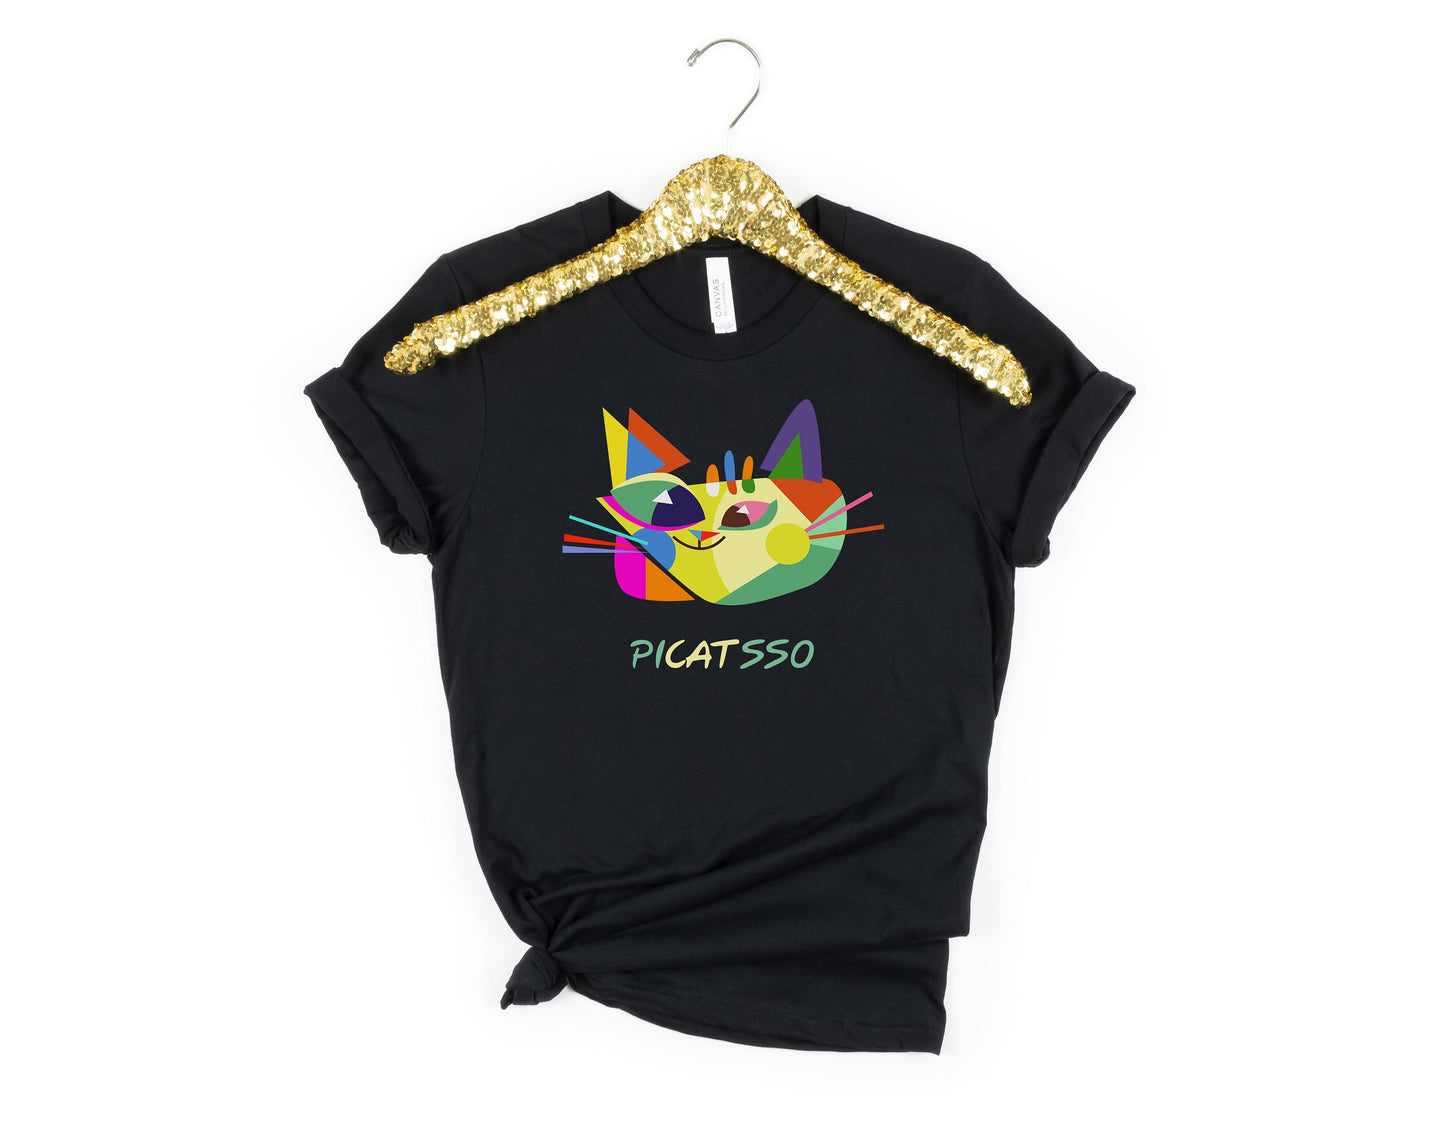 Picatsso Picasso Cat Art Ultra Soft Graphic Tee Unisex Soft Tee T-shirt for Women or Men